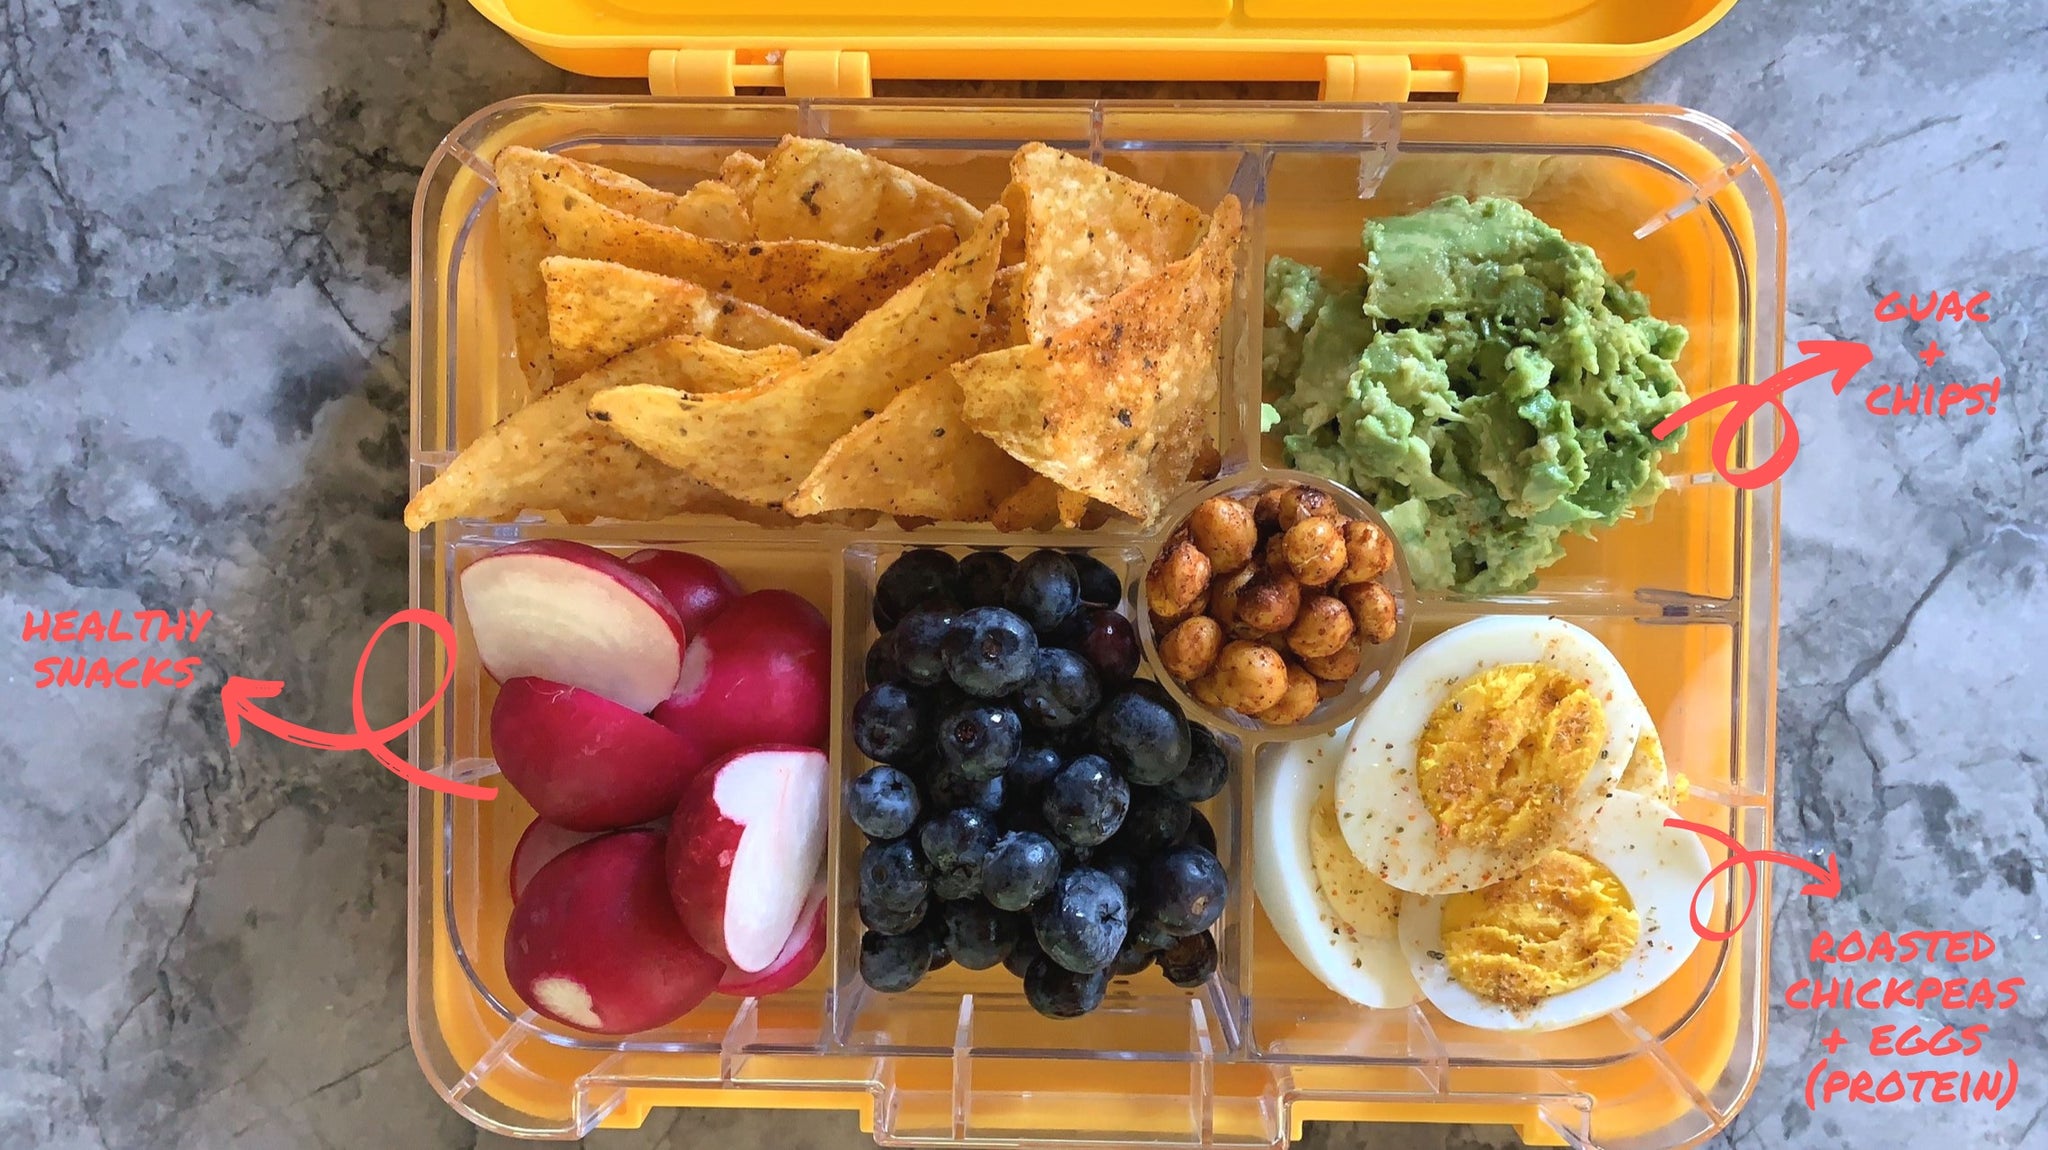 Guacamole and chips bento box idea from Legacy Greens grocery store downtown Kitchener